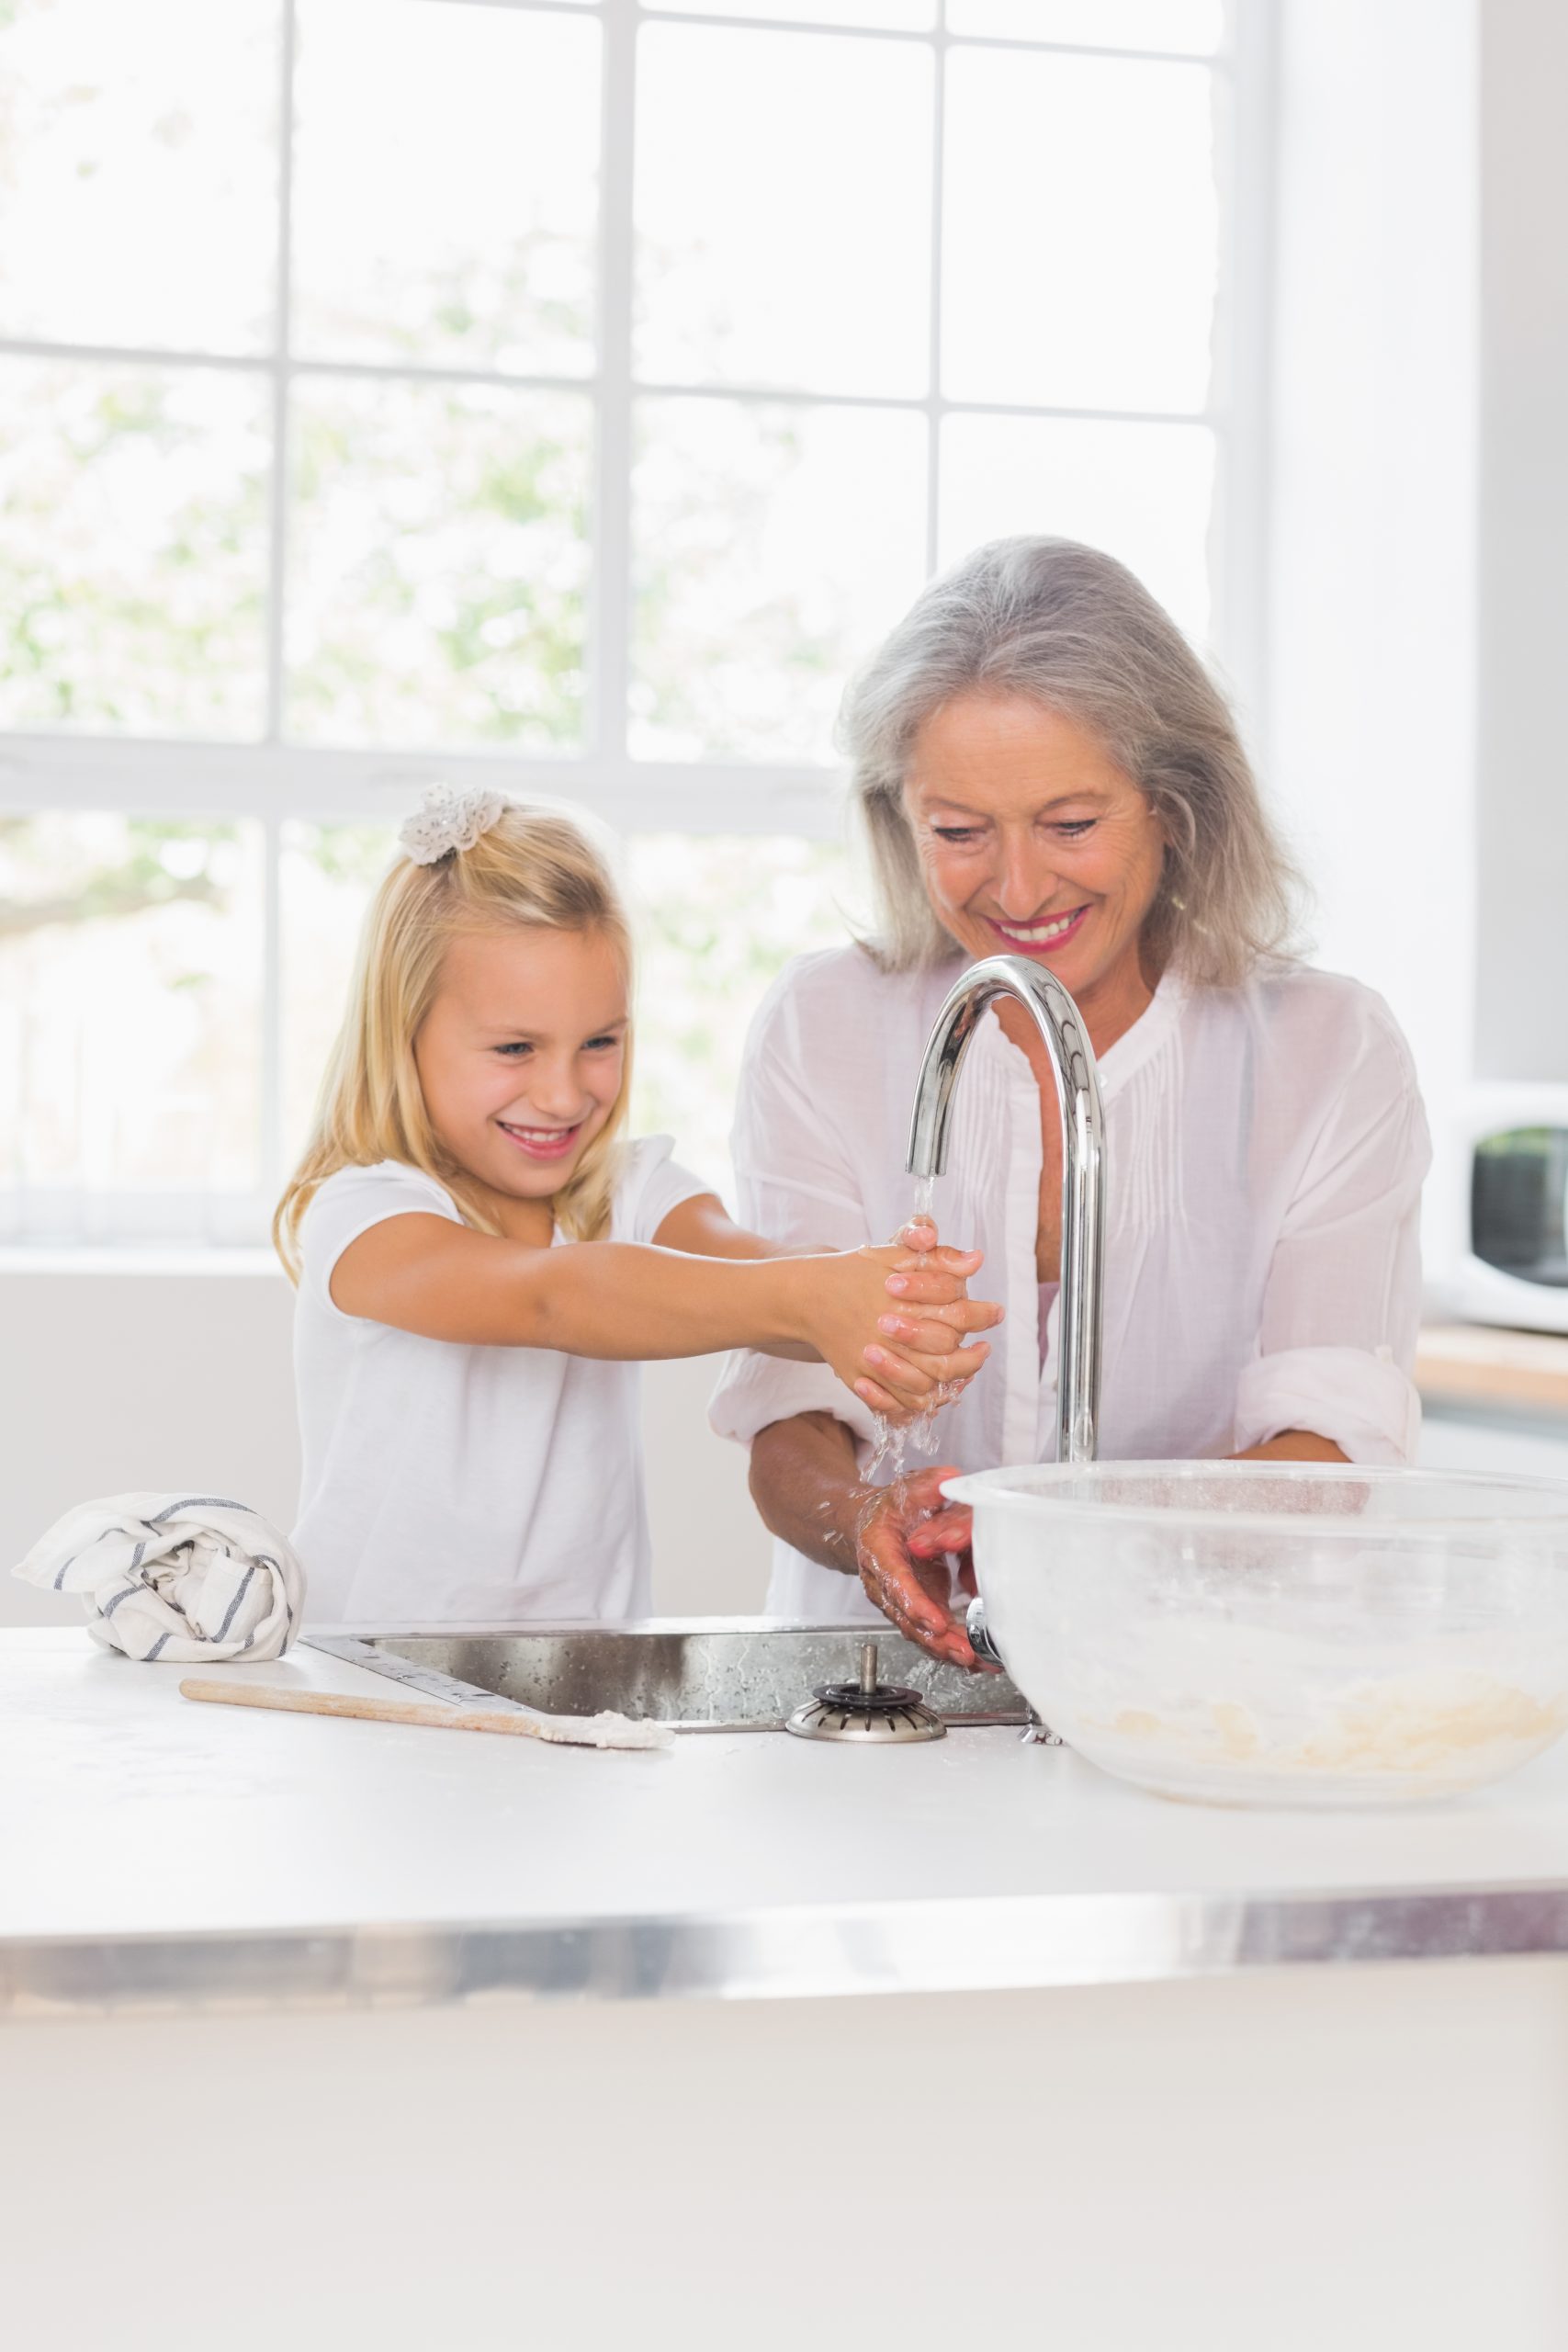 smiling woman and young girl washing hands in the kitchen